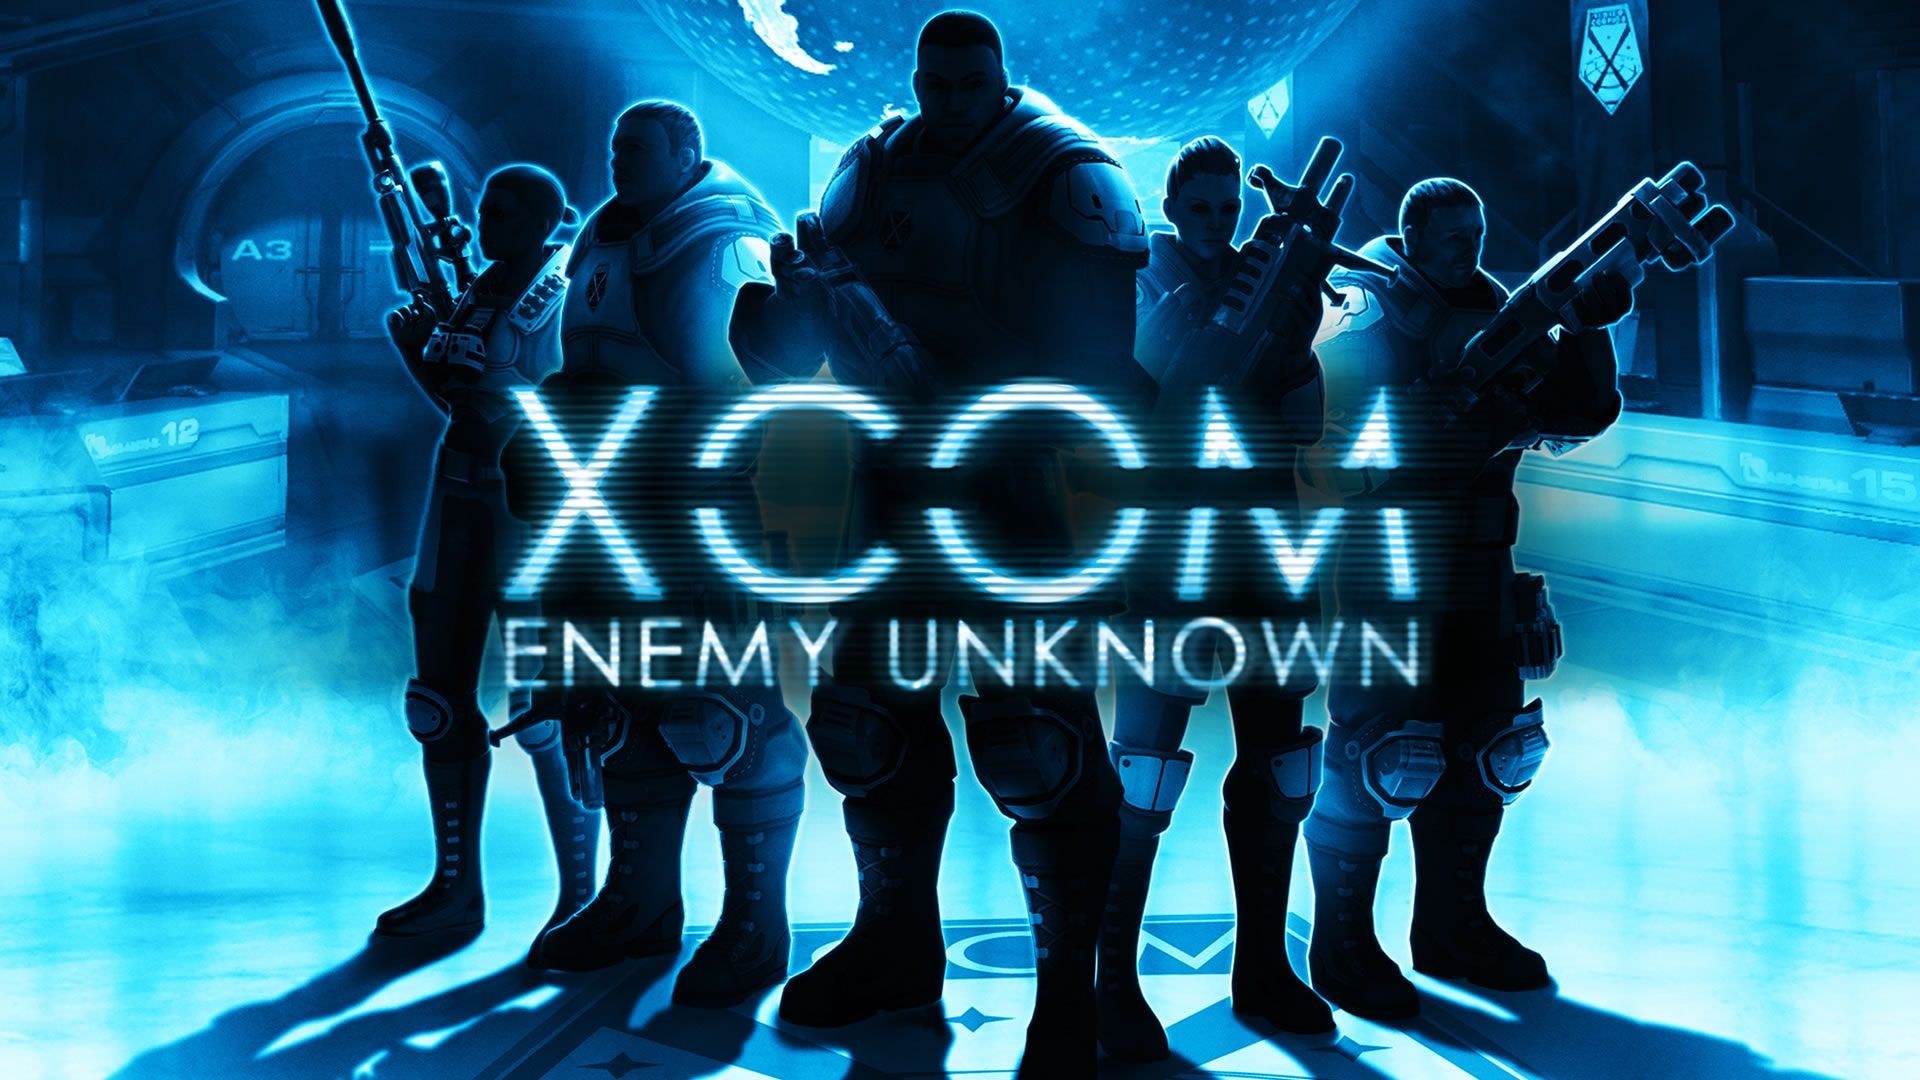 XCOM: Enemy Unknown Removed From App Store, Google Play